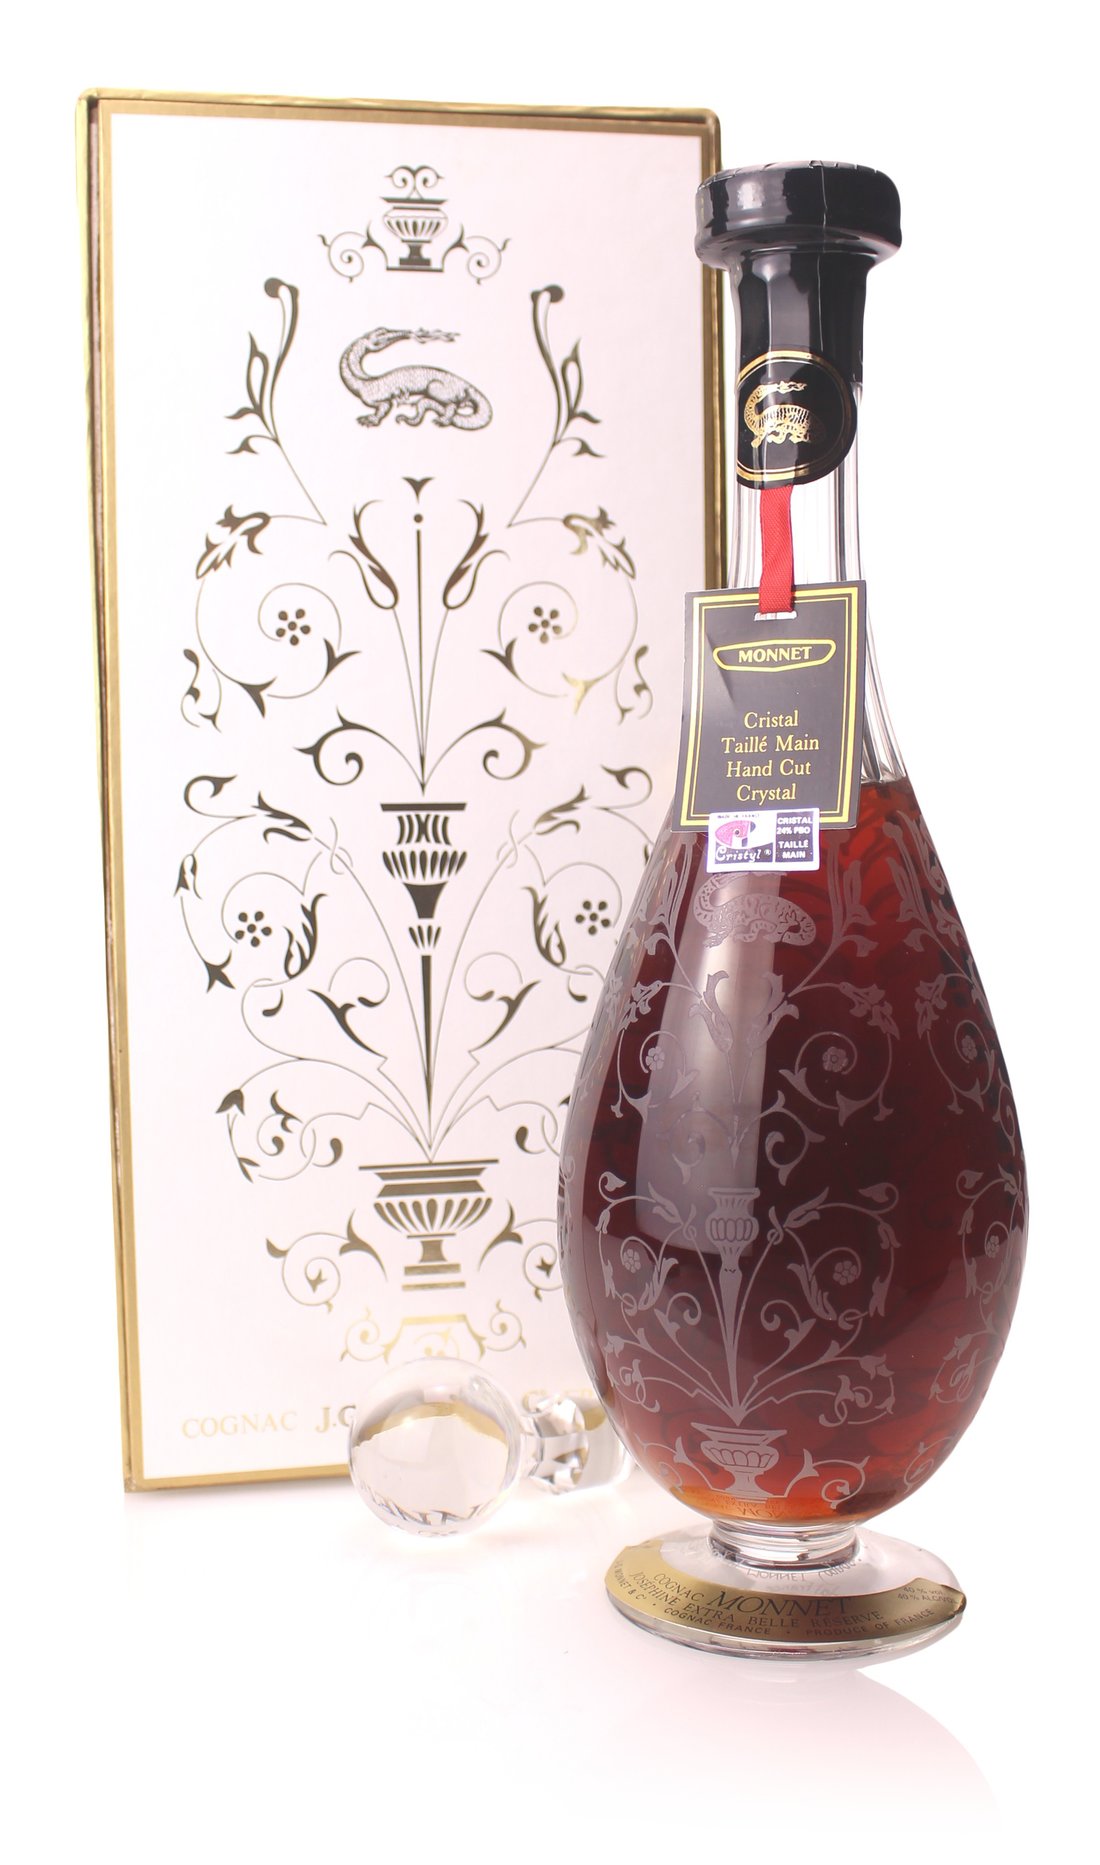 Monnet Cognac Josephine Extra. Released in 1970's. In engraved crystal decanter, accompanied by a s